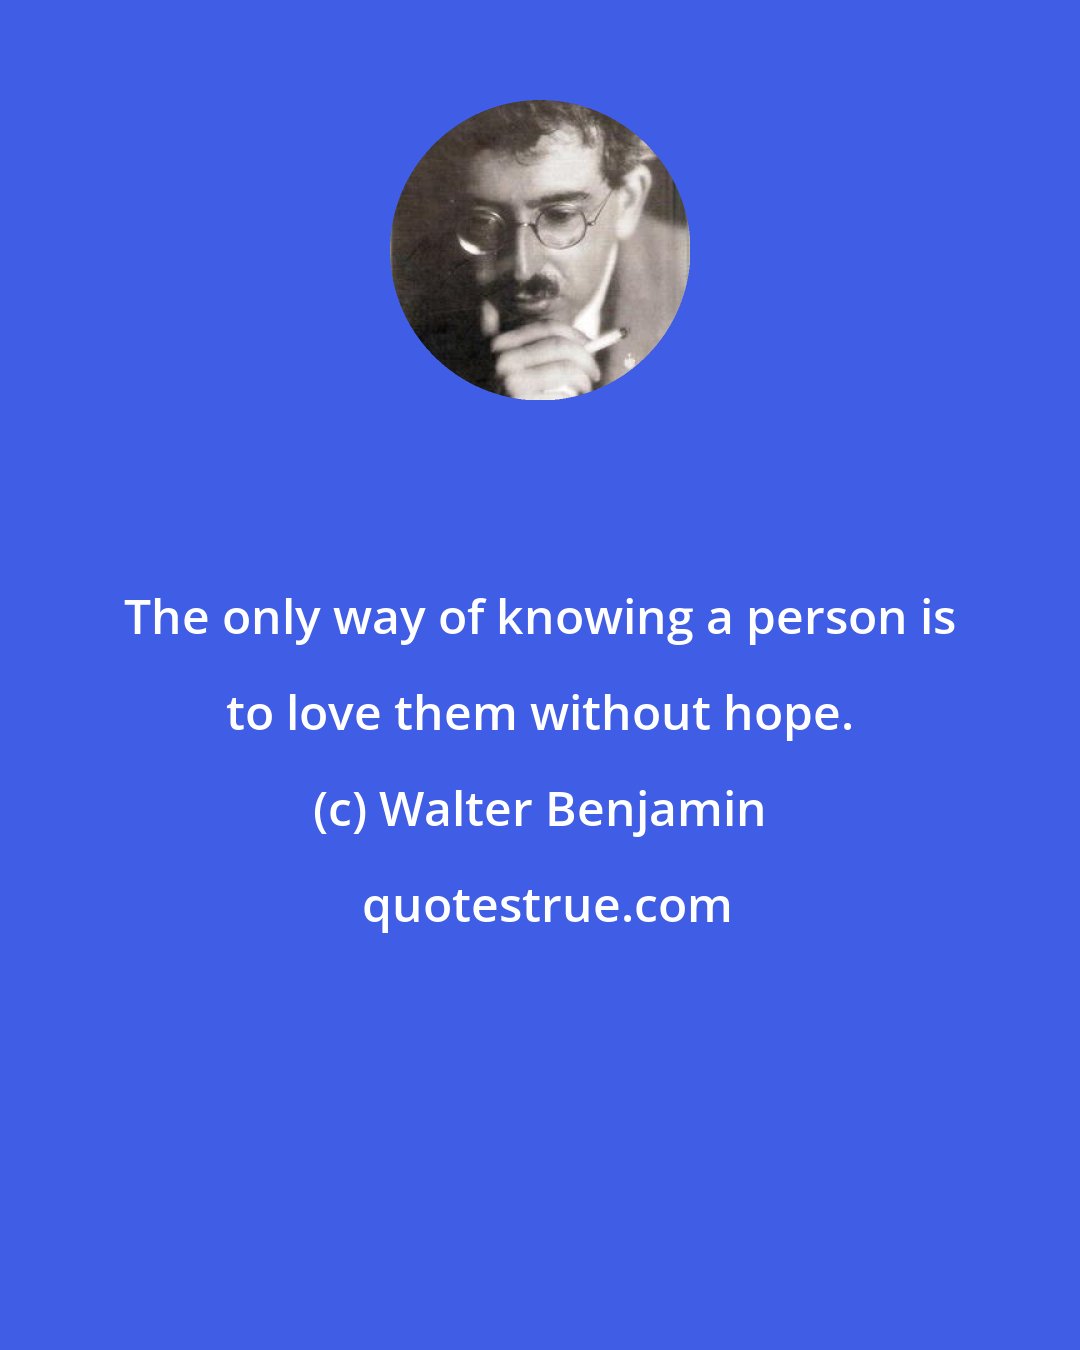 Walter Benjamin: The only way of knowing a person is to love them without hope.